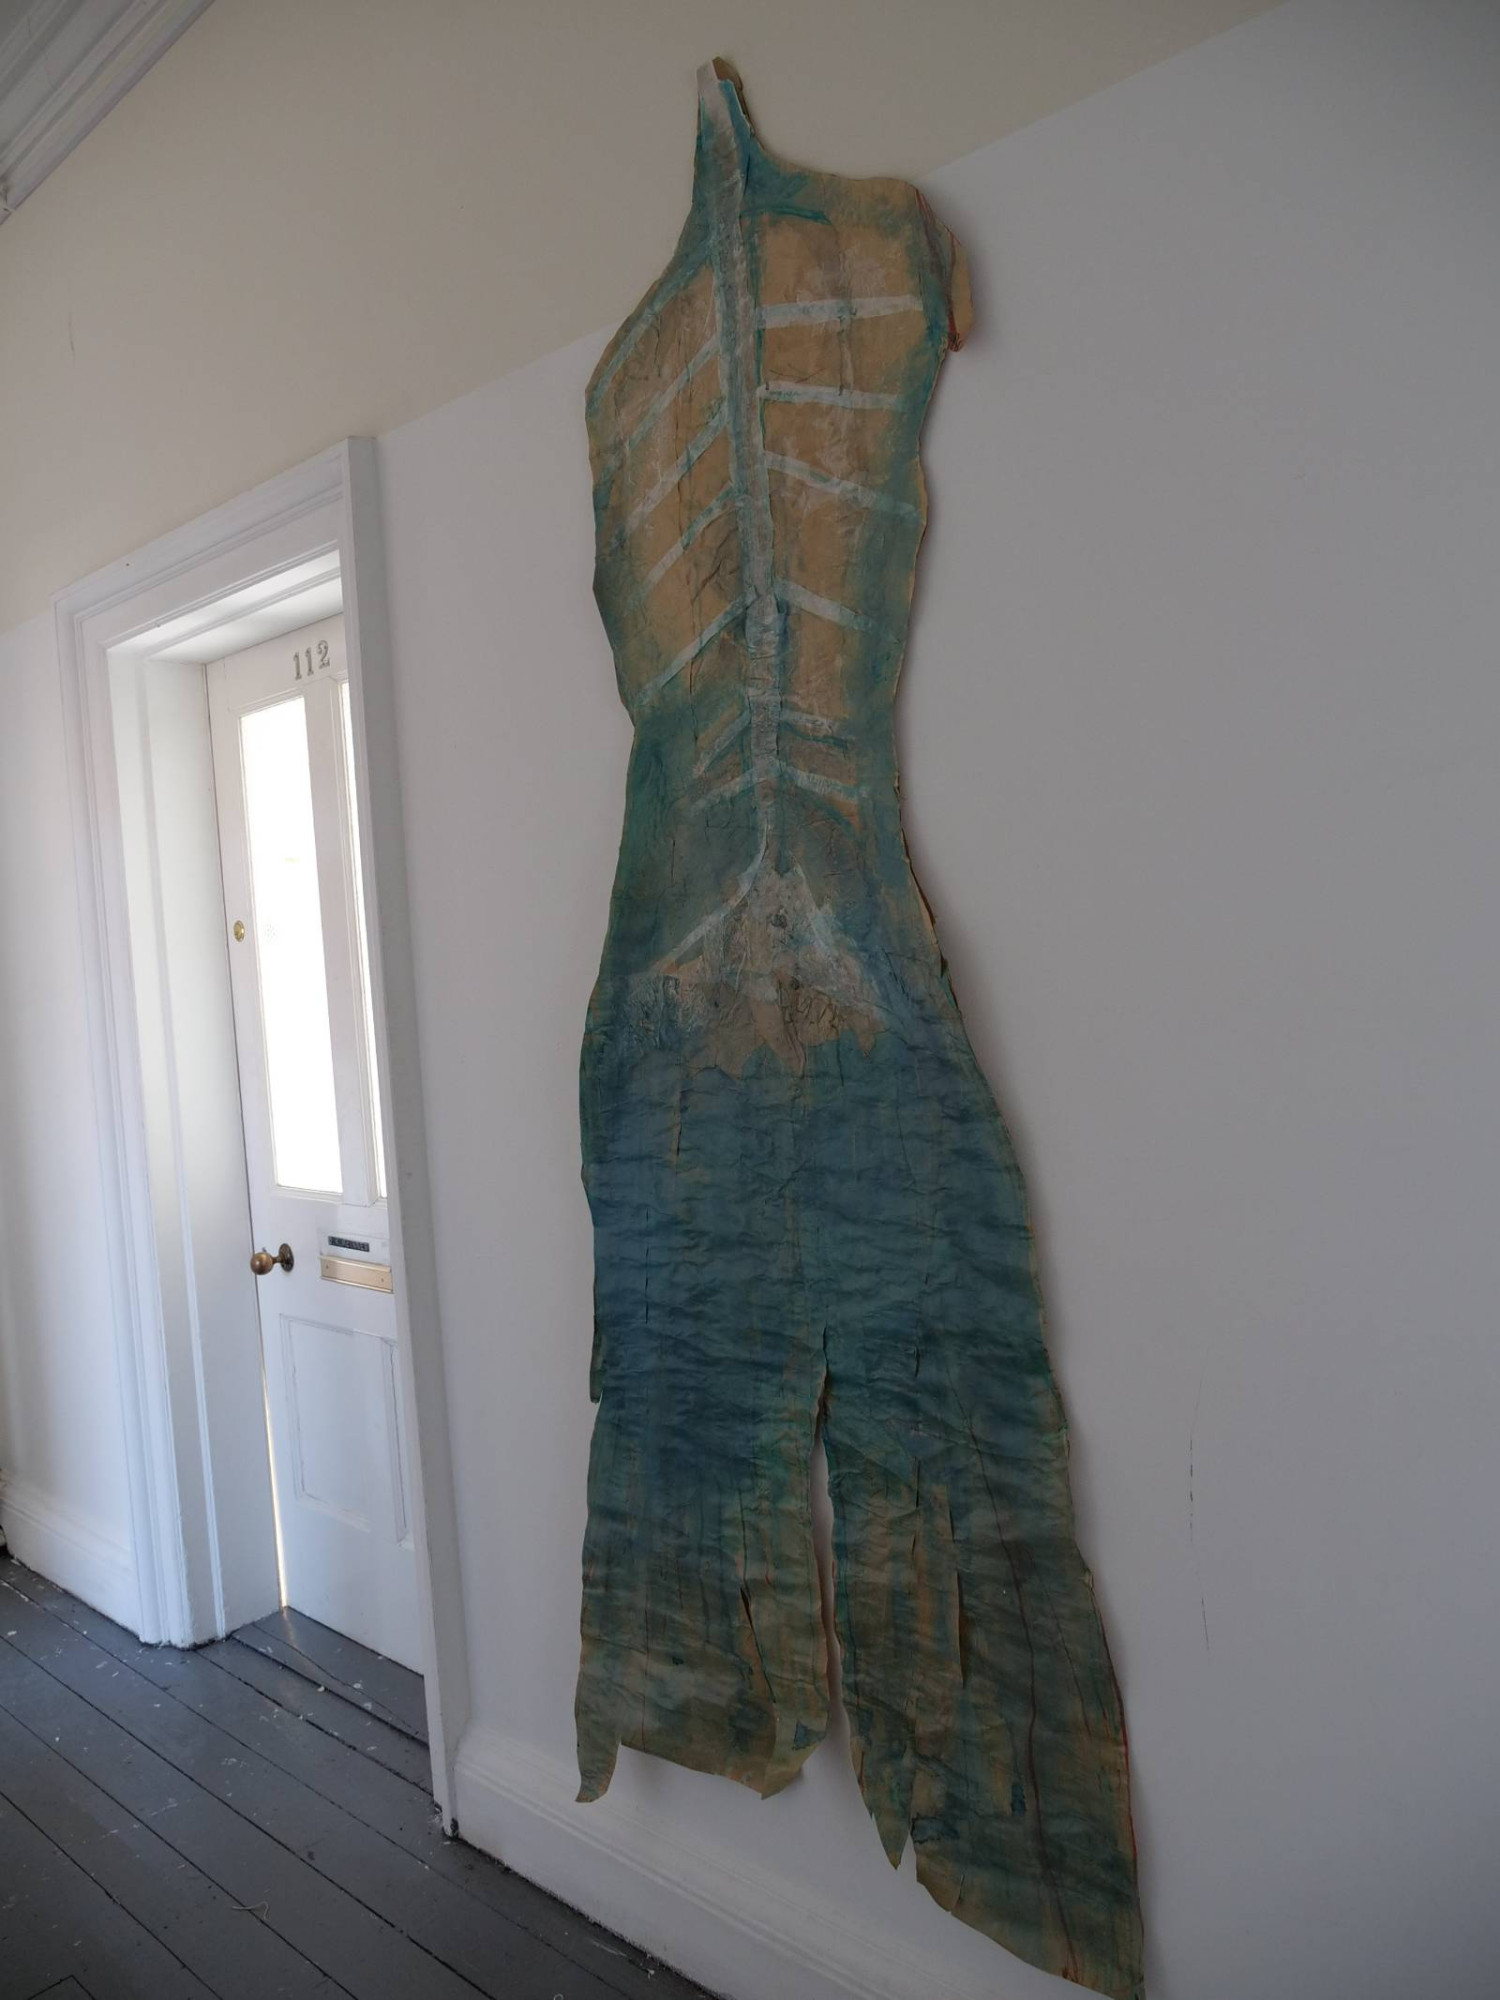 *Distancing Device with Selkie skin*, foam board, jesmonite, paint, white rug underlay with paint, 60 x 93cm